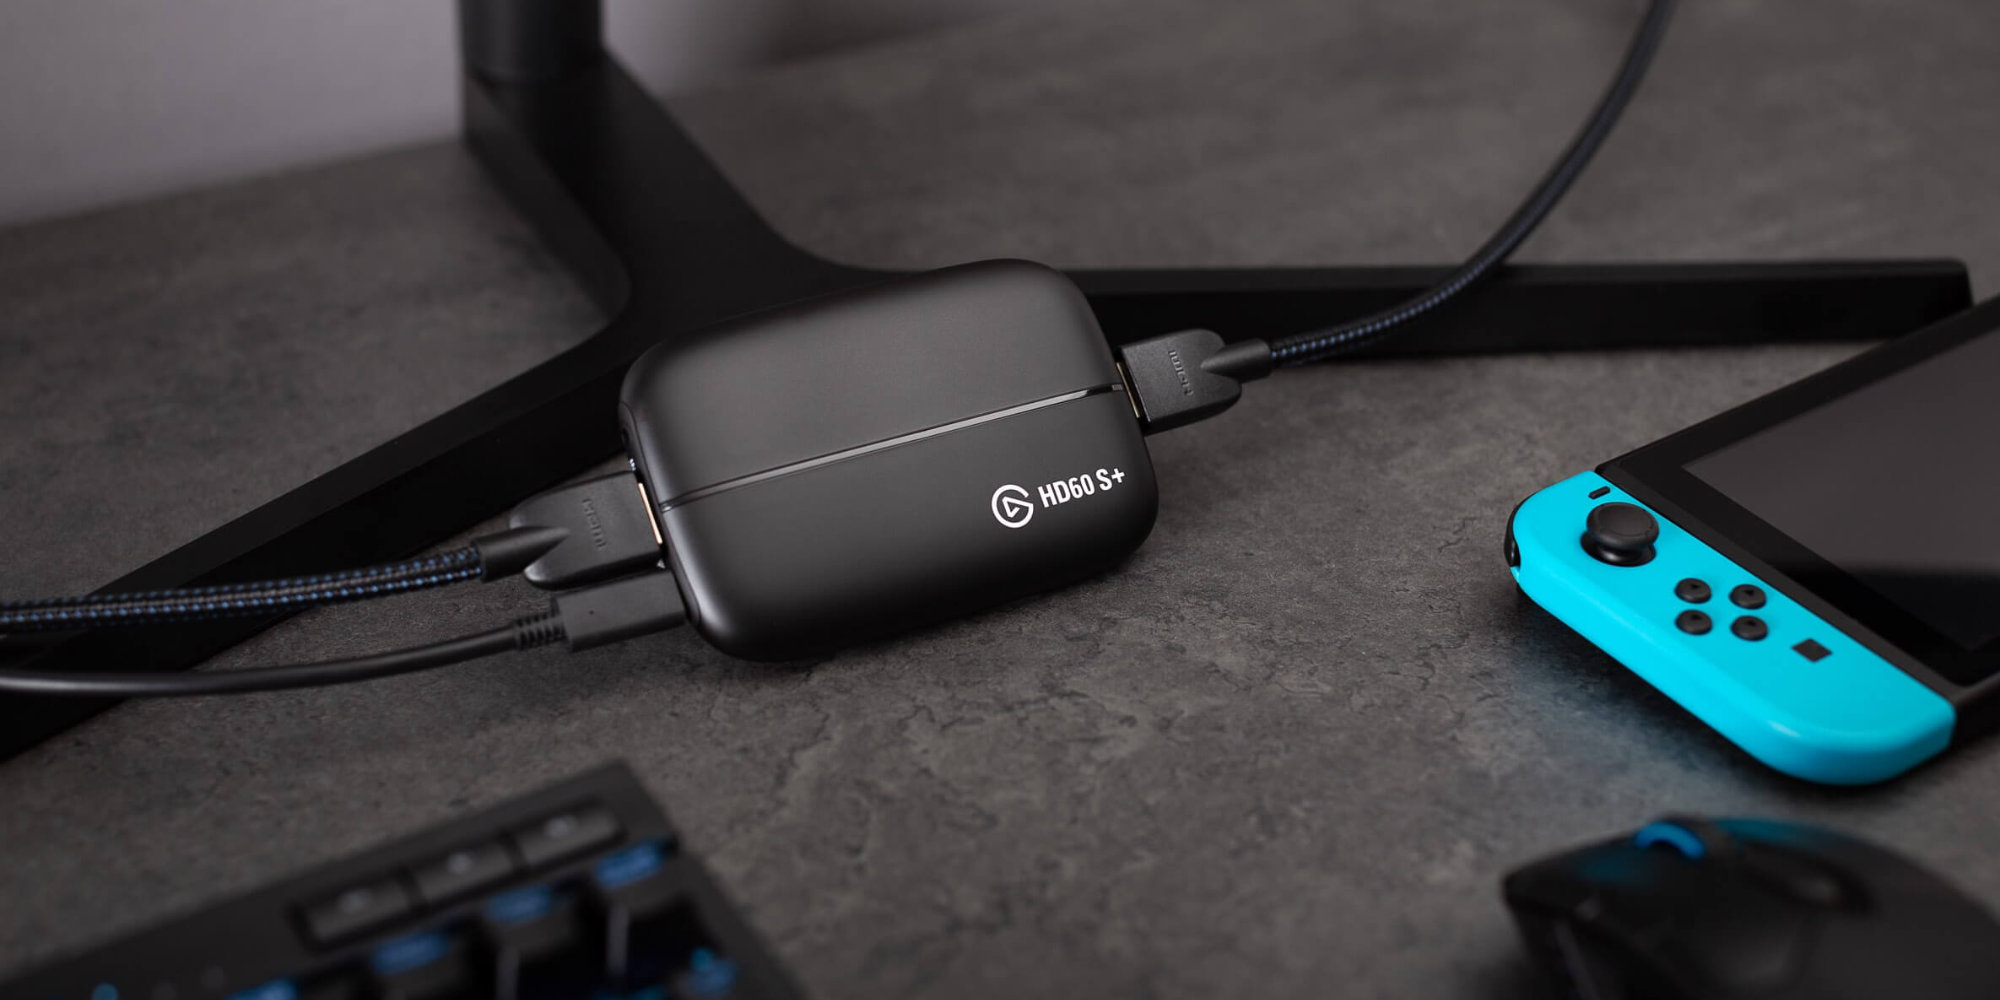 Elgato's HD60 S+ Capture Card packs 4K60 visuals at $170 all-time low